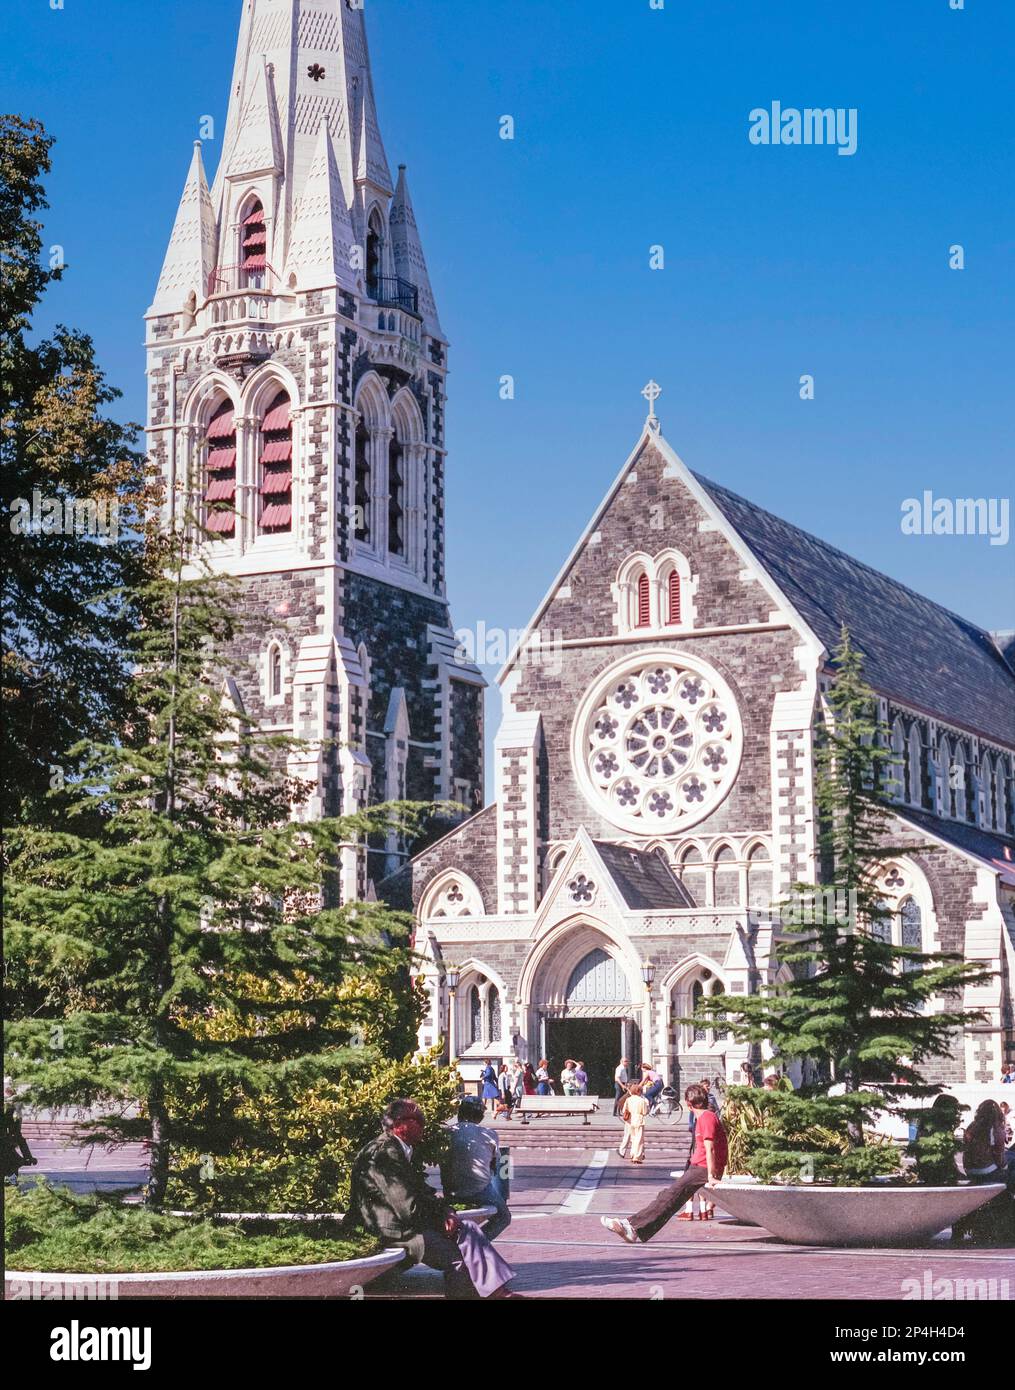 A 1981 historic image of spruce or fir trees in large dish pots in Cathedral Square in front of Christchurch Cathedral in the South Island of New Zealand Stock Photo